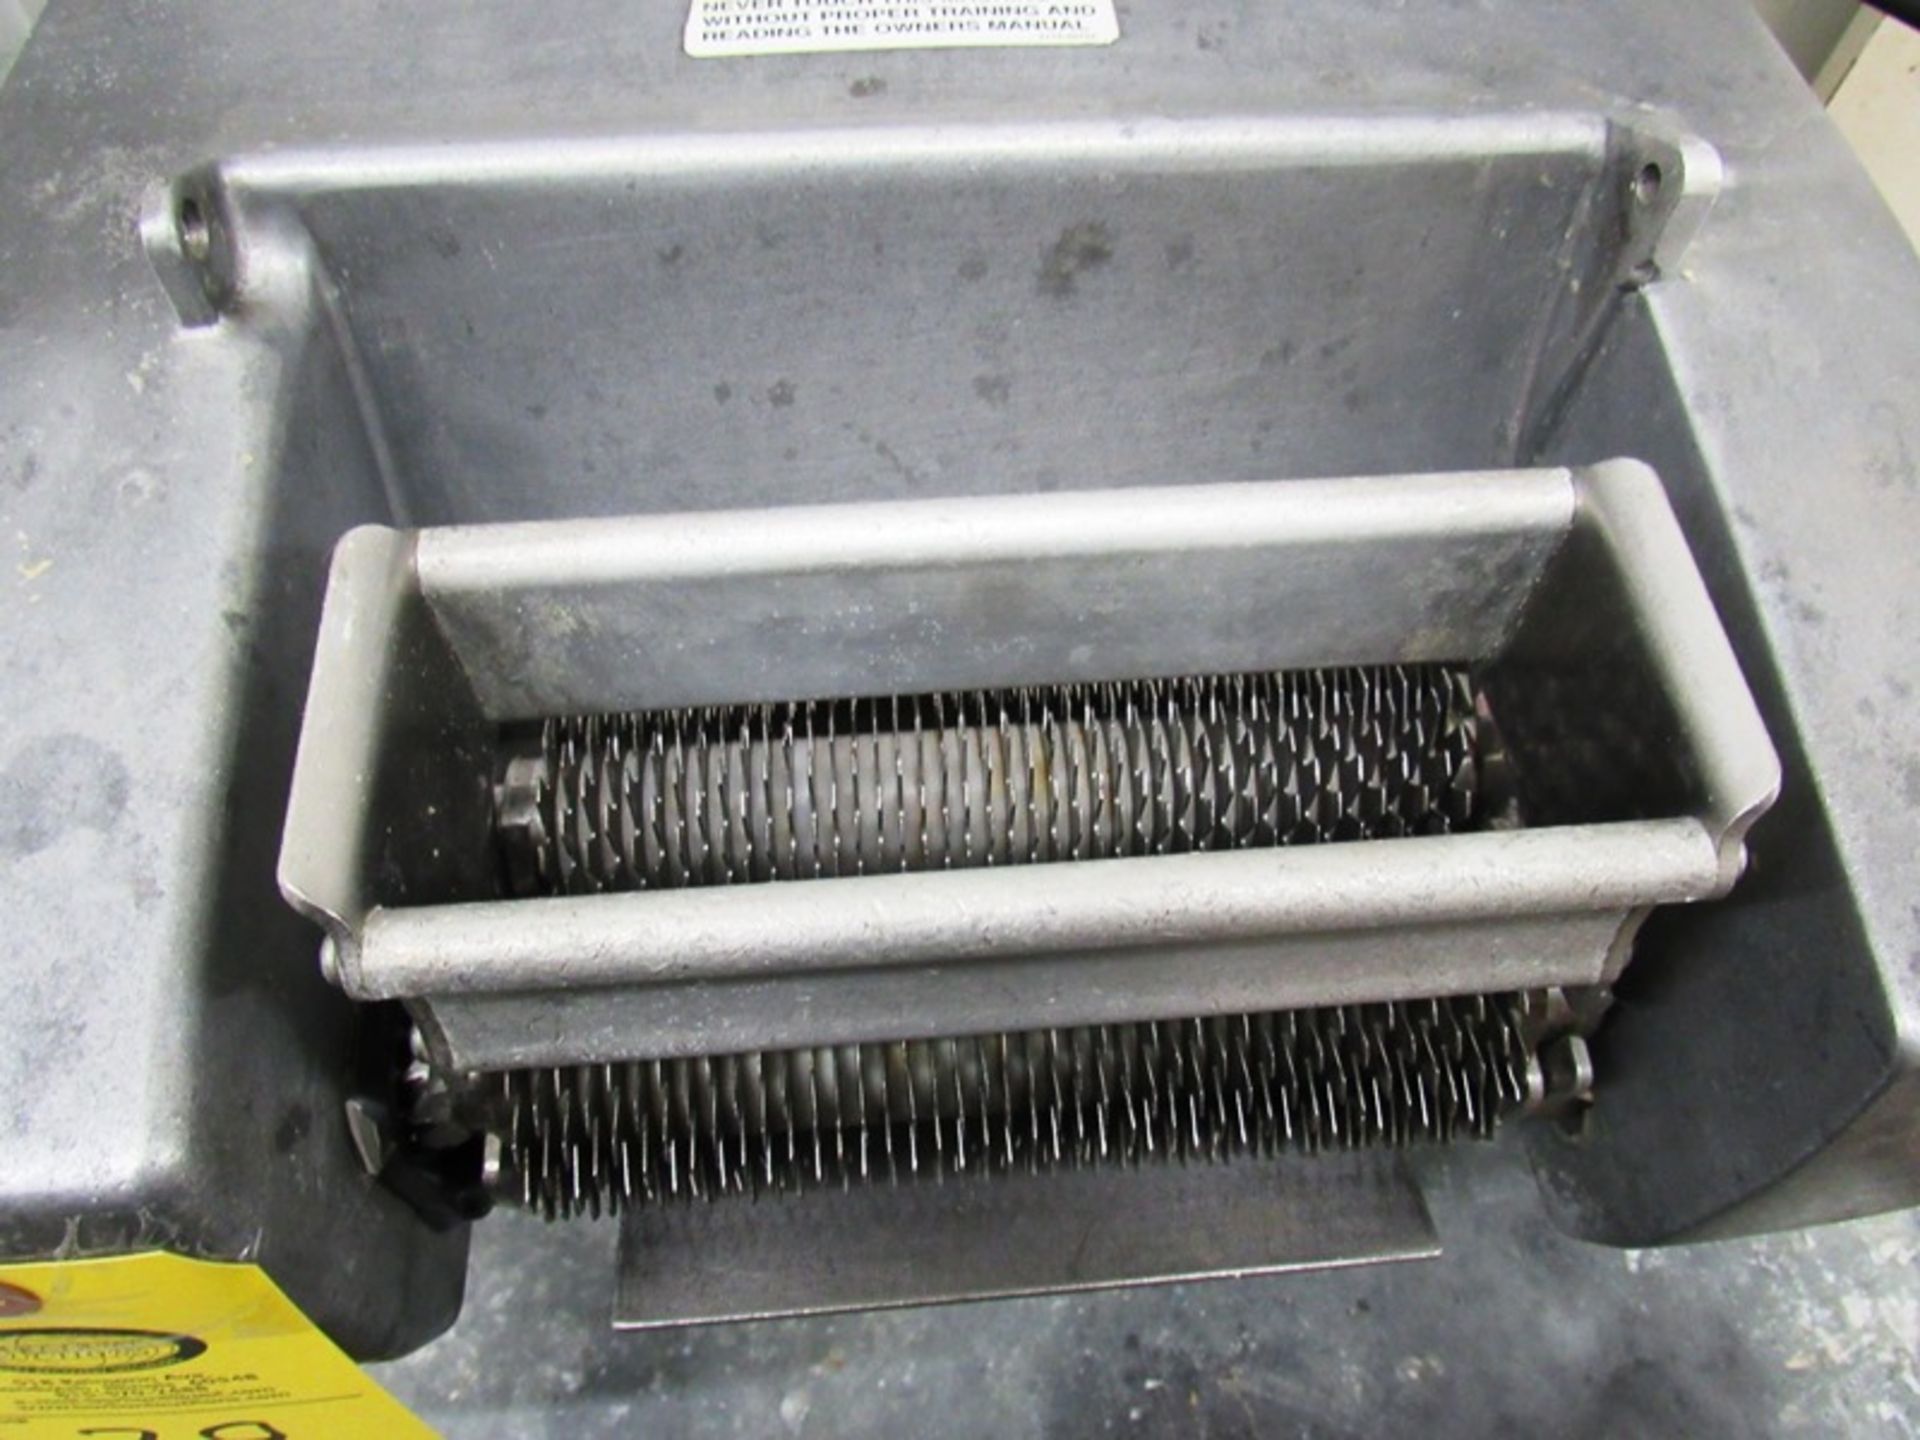 Berkel Tenderizer, Model 705, SN 9234-1121-15284(All Funds Must Be Received by Friday, December 6th, - Image 4 of 5